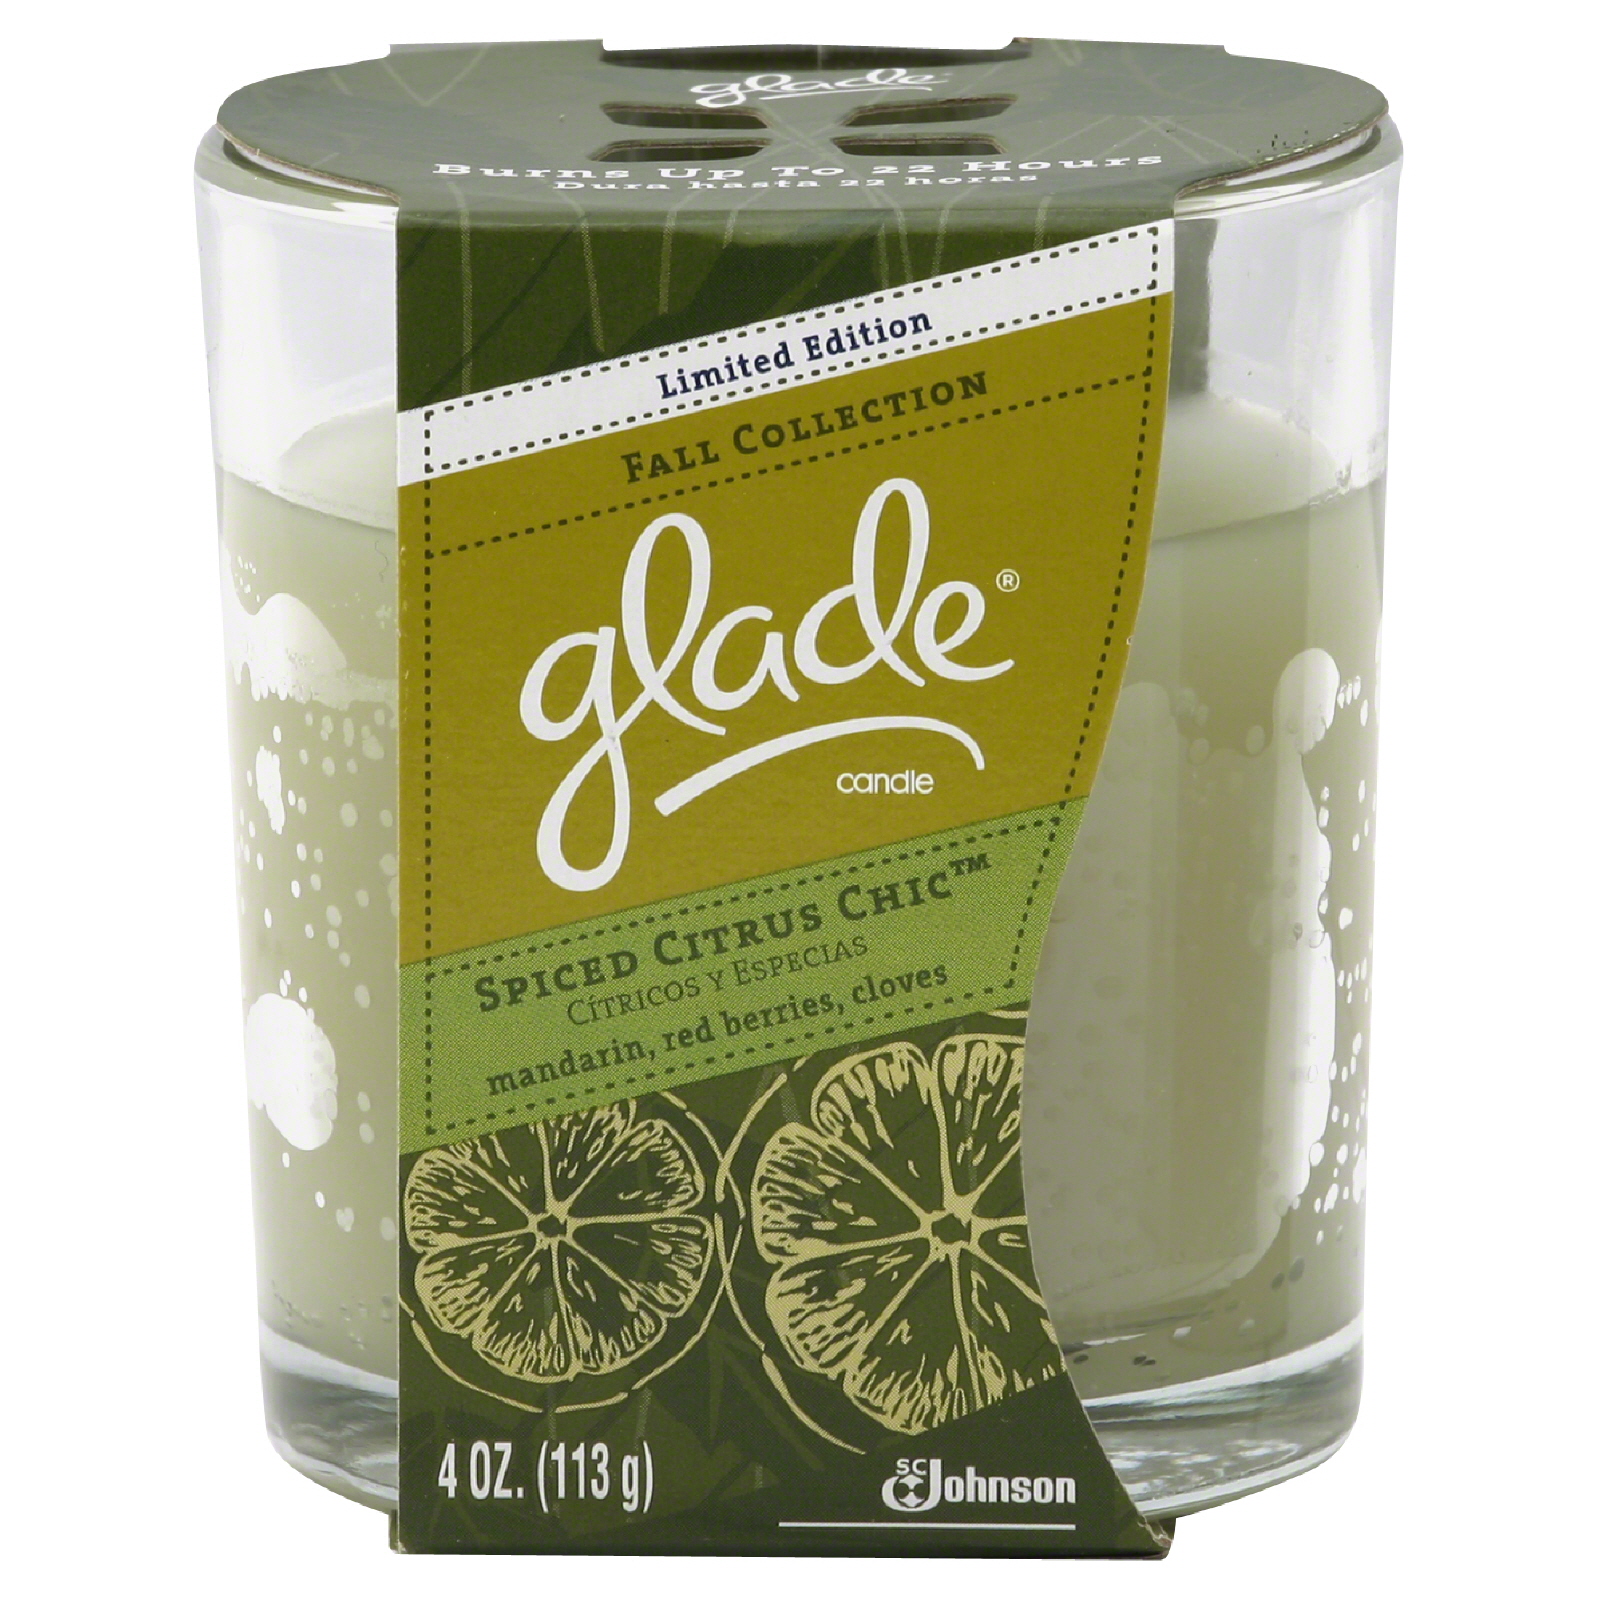 Glade Candle, Spiced Citrus Chic 1 candle [4 oz (113 g)]